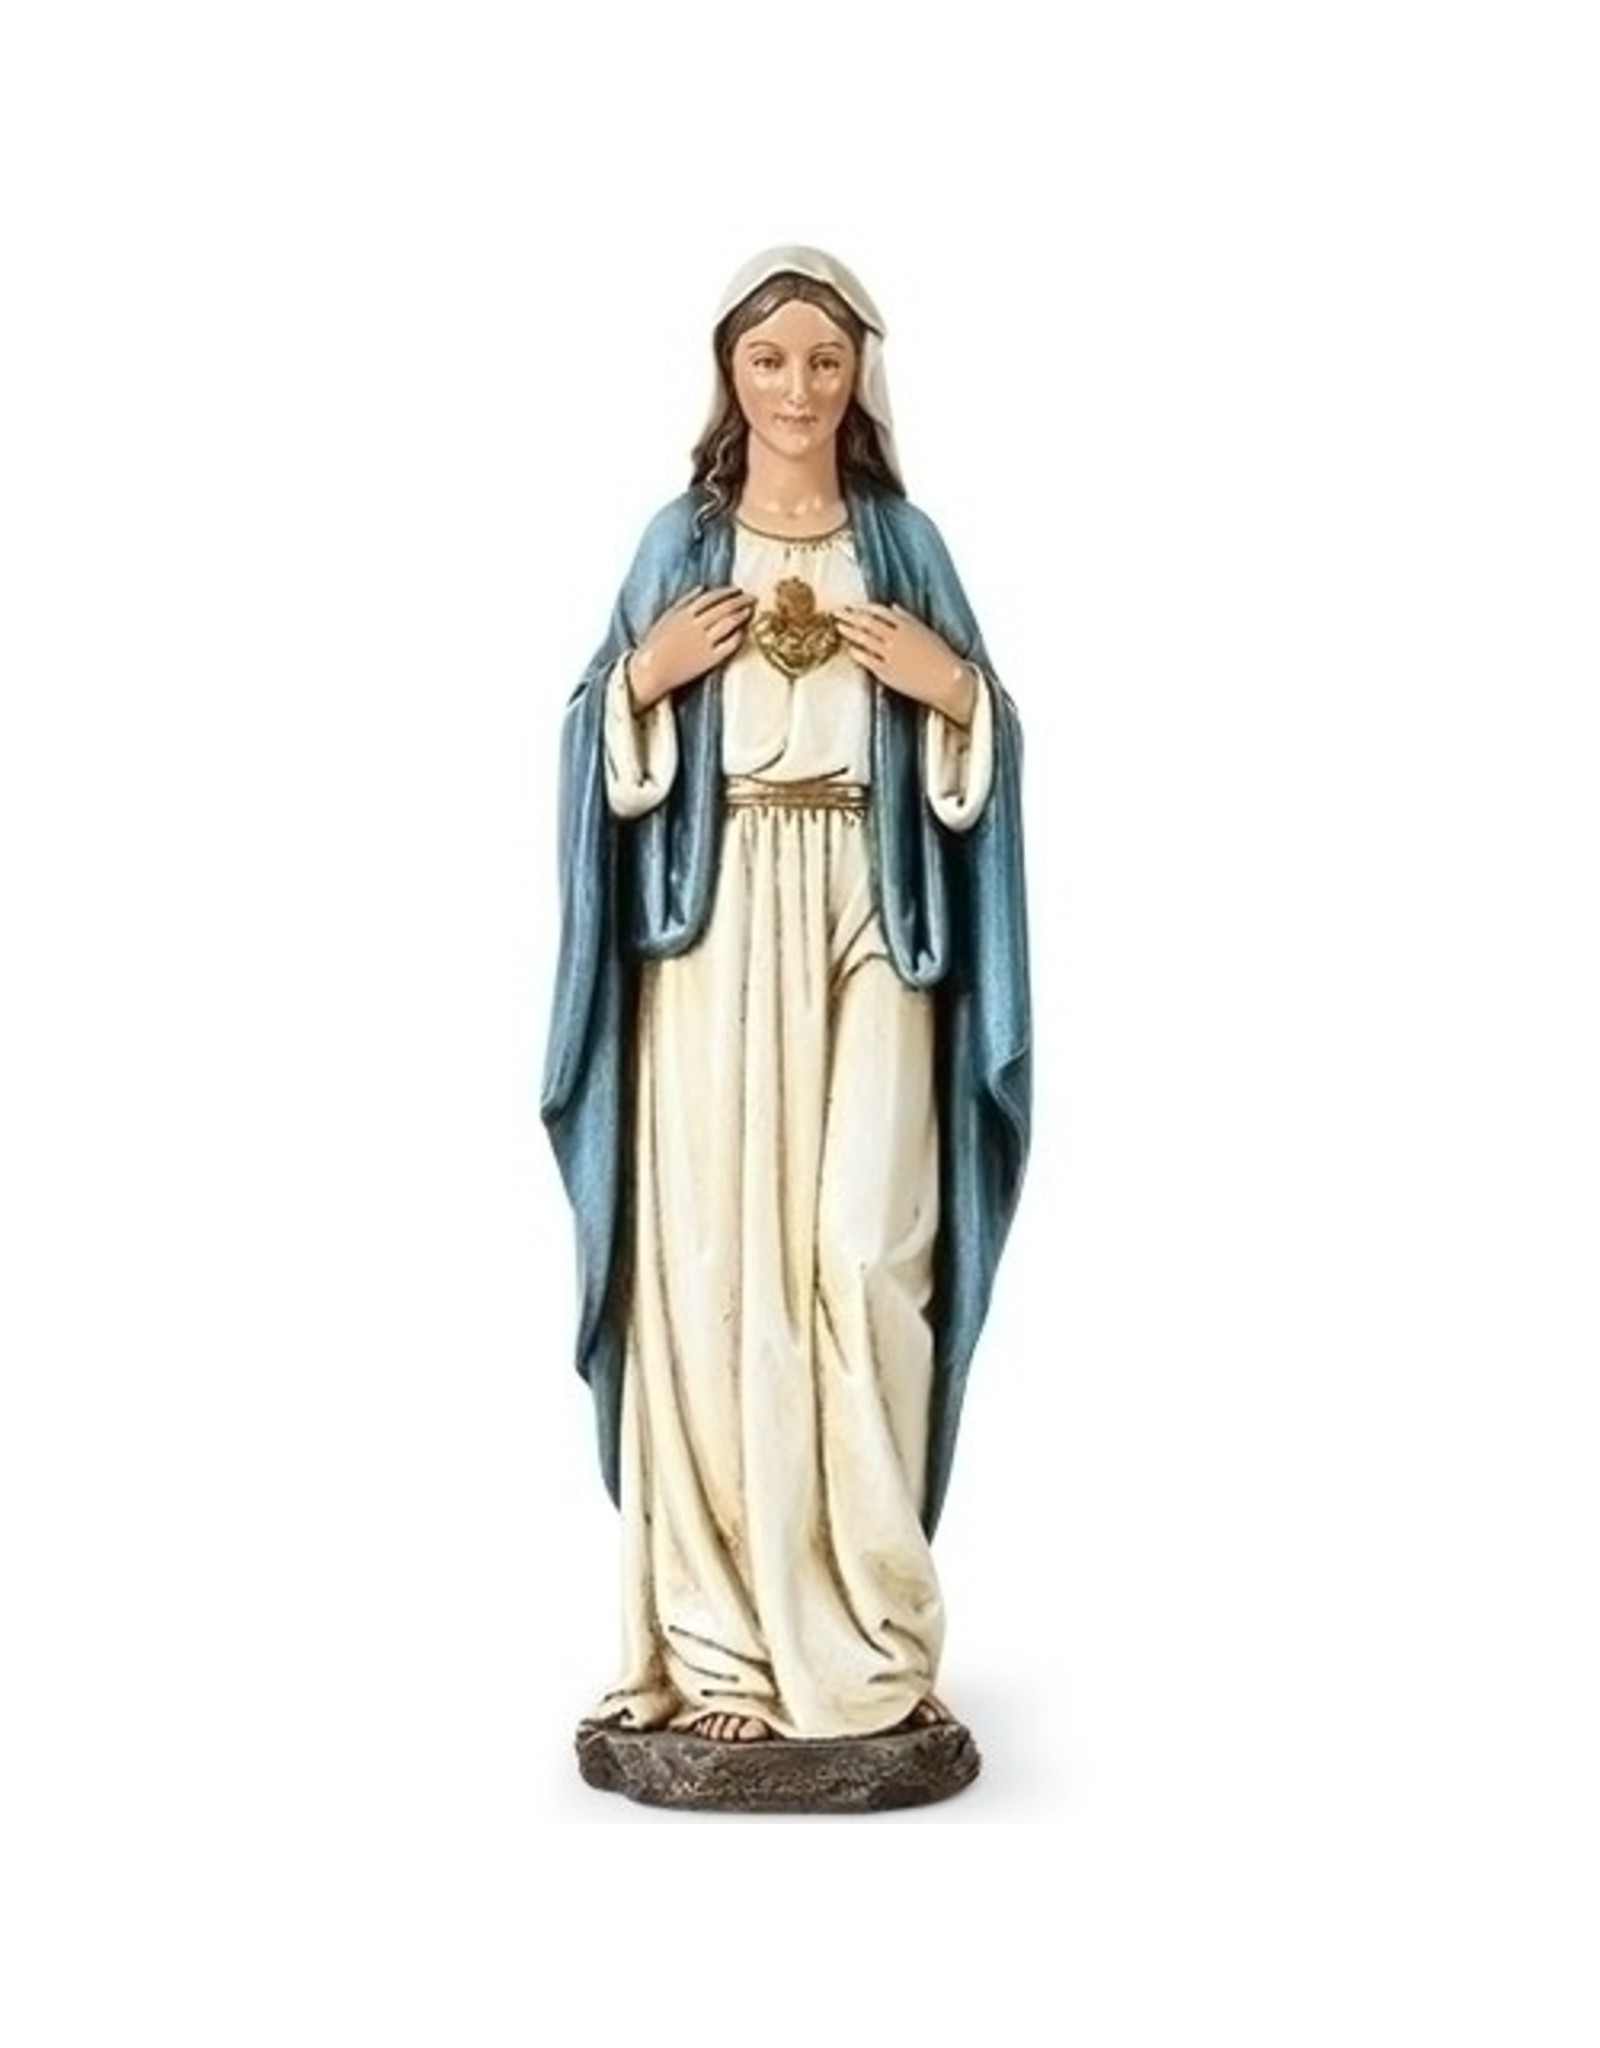 Statue Immaculate Heart of Mary (9.75")